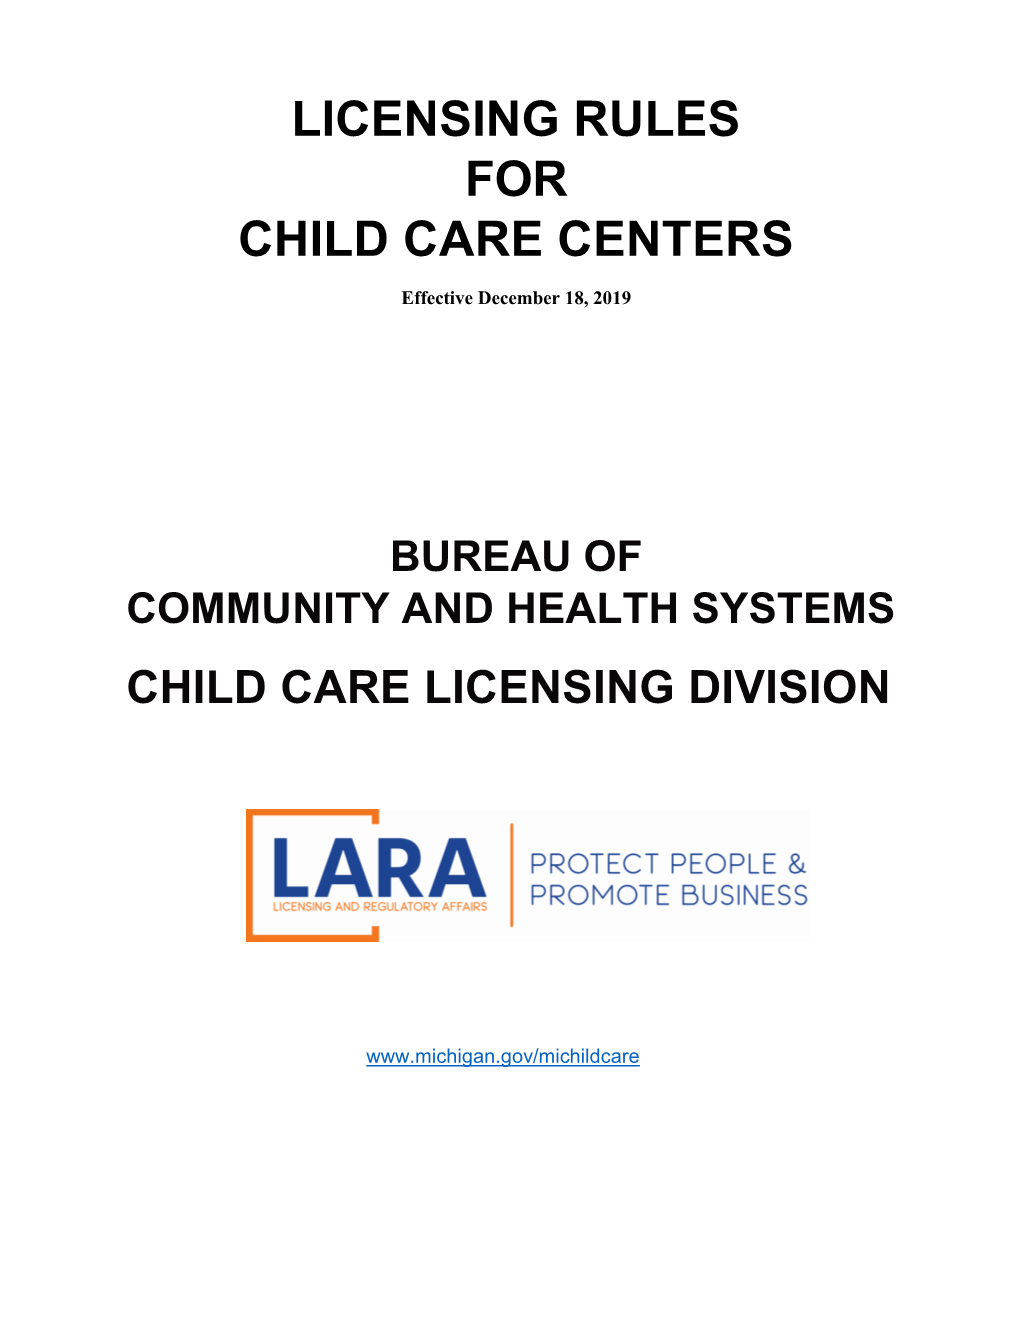 Licensing Rules for Child Care Centers